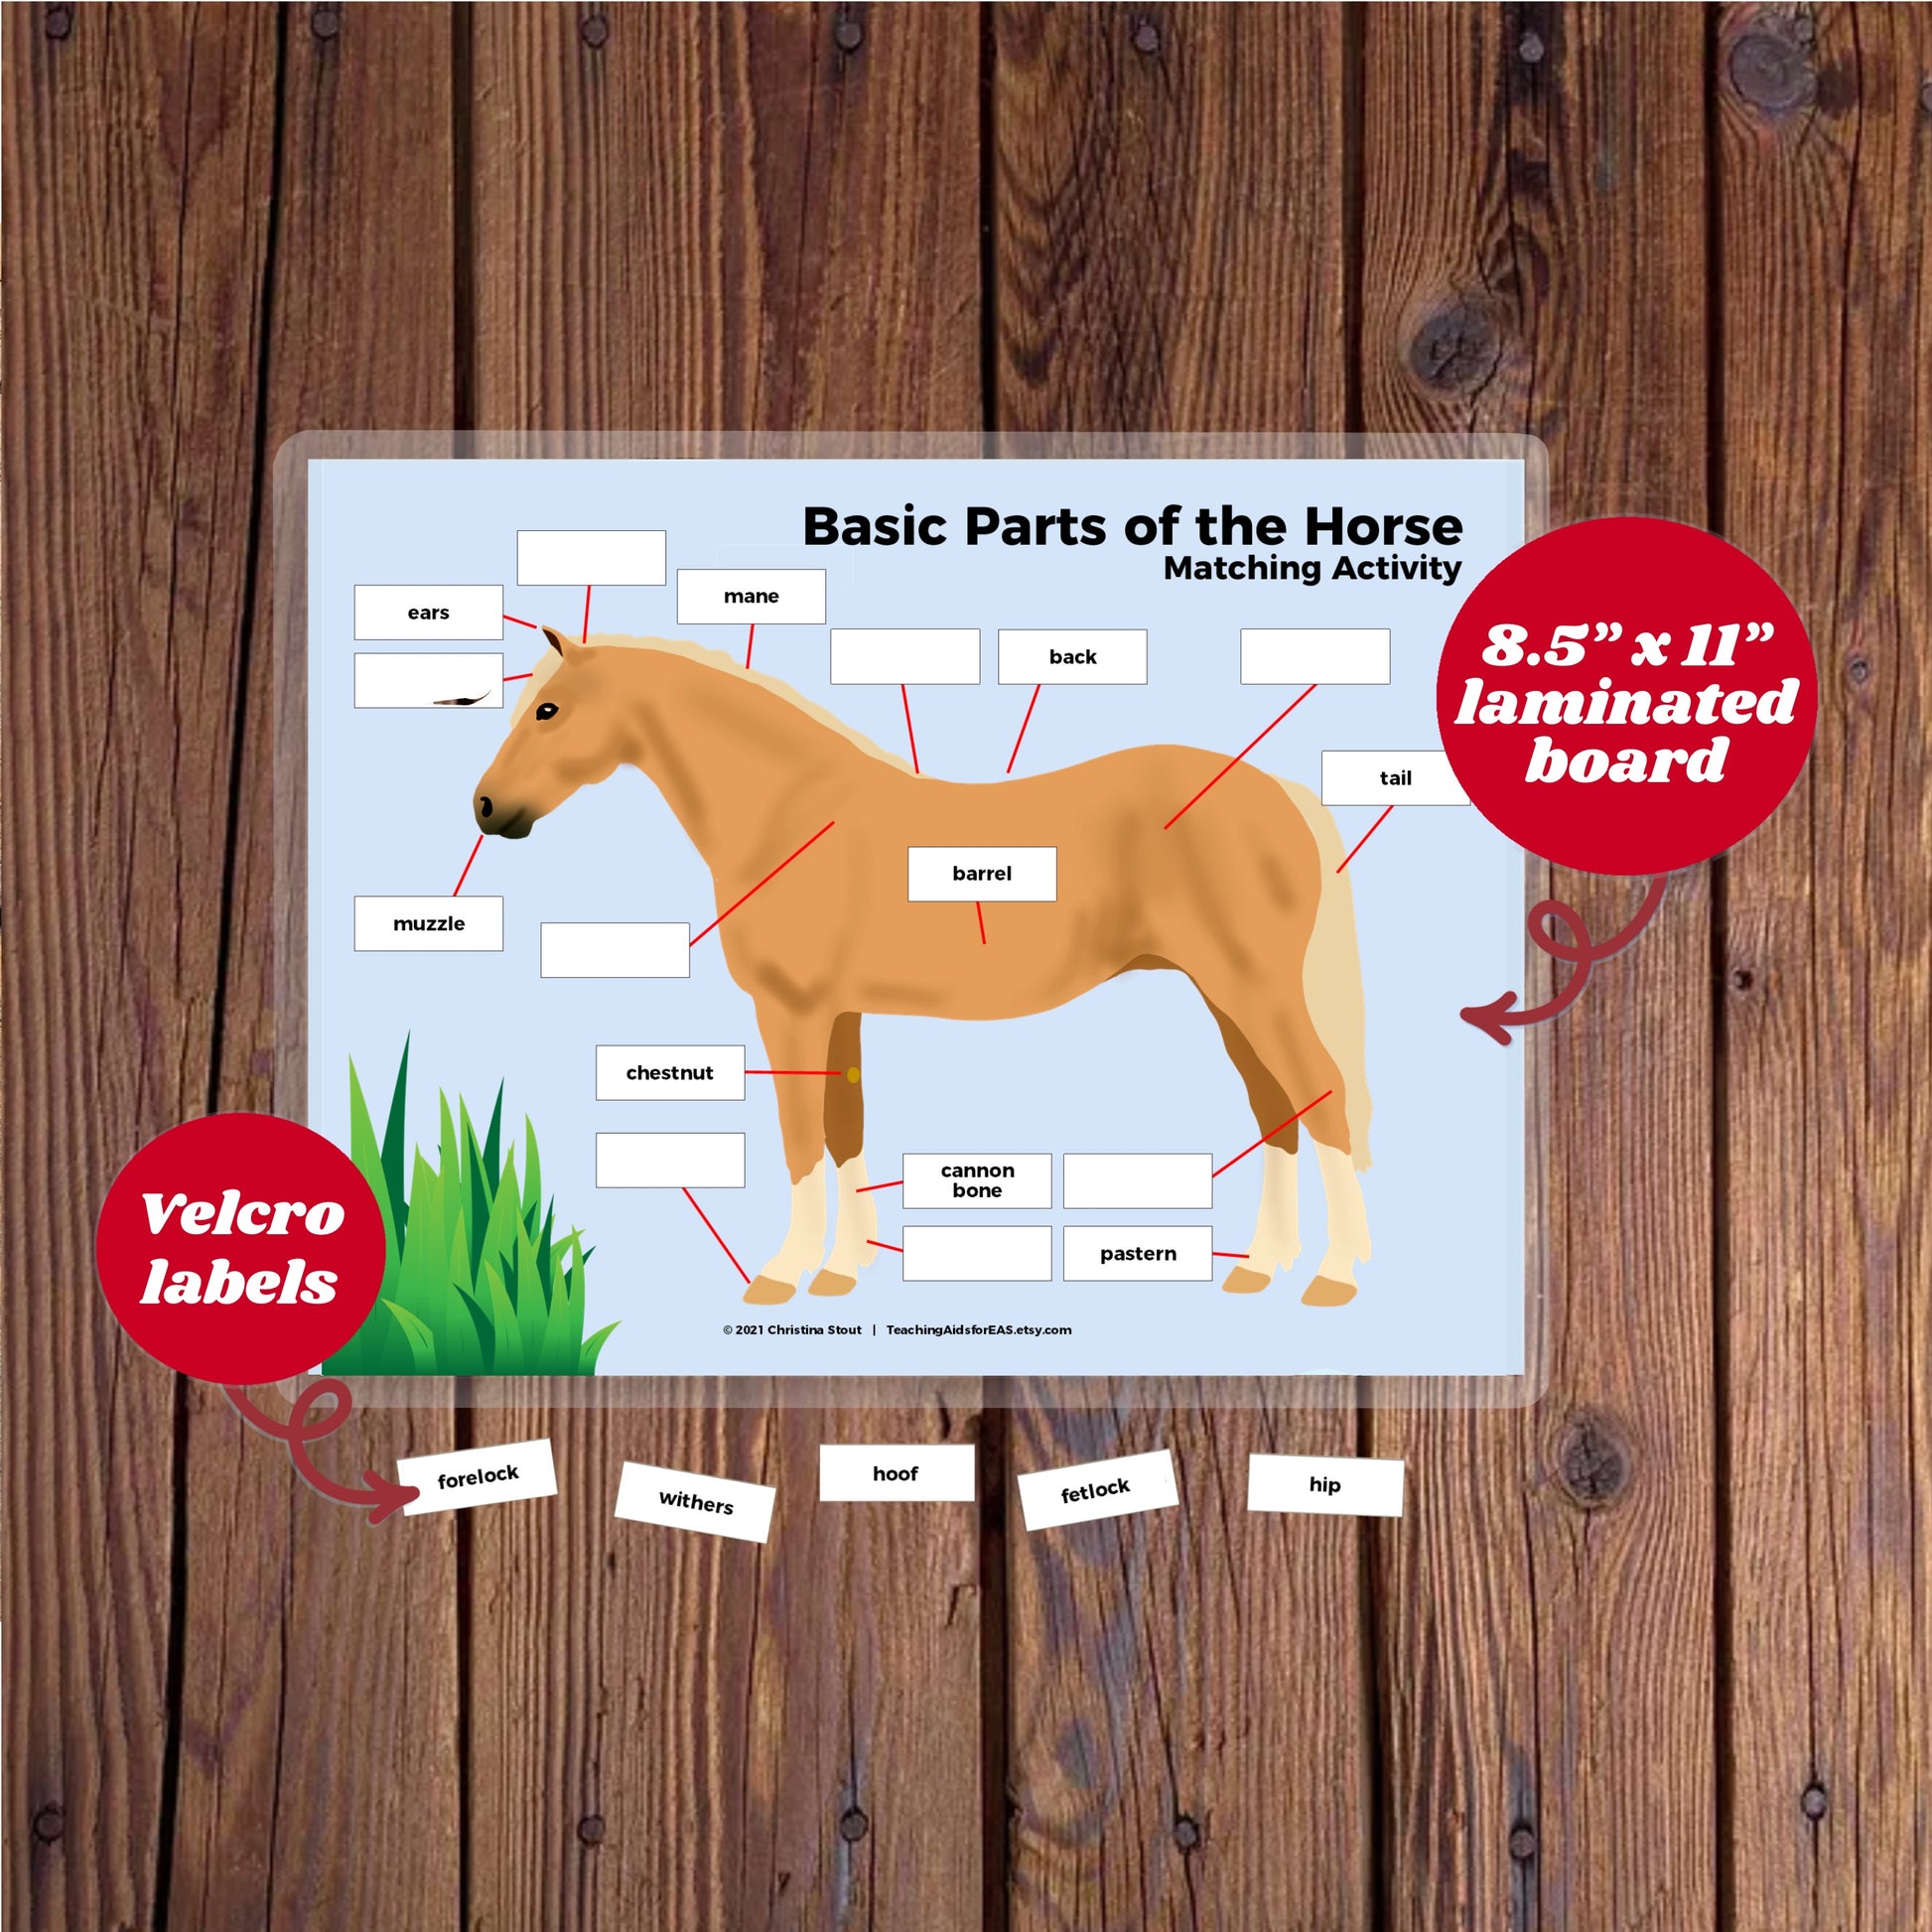 velcro board, parts of the hoof – Teaching Aids for EAS